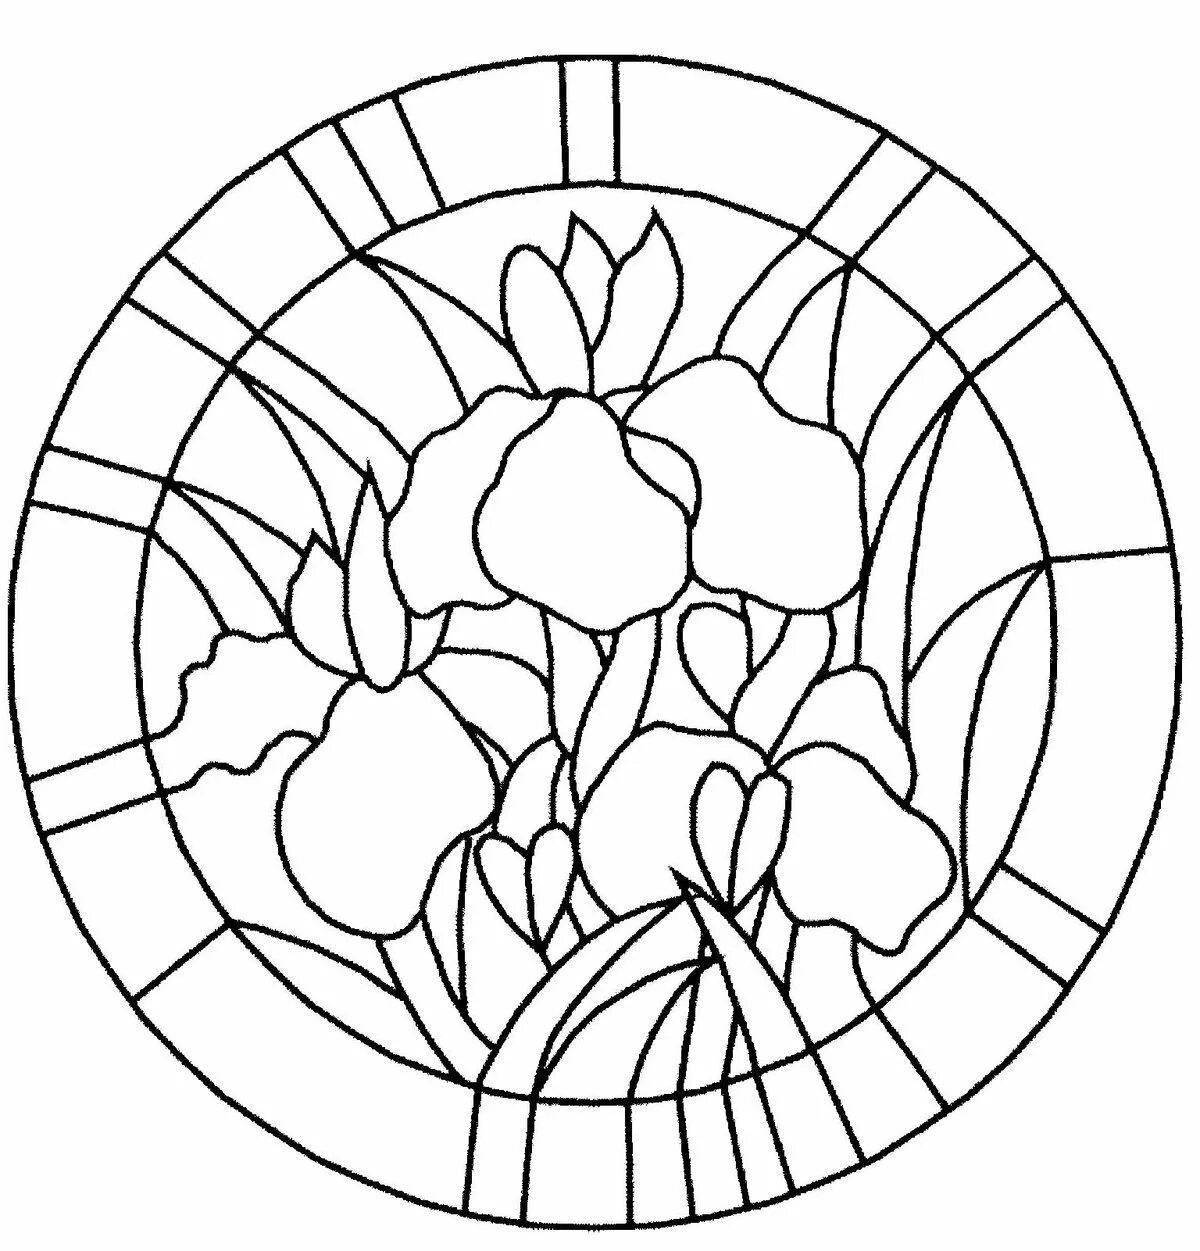 Violent stained glass coloring pages for babies